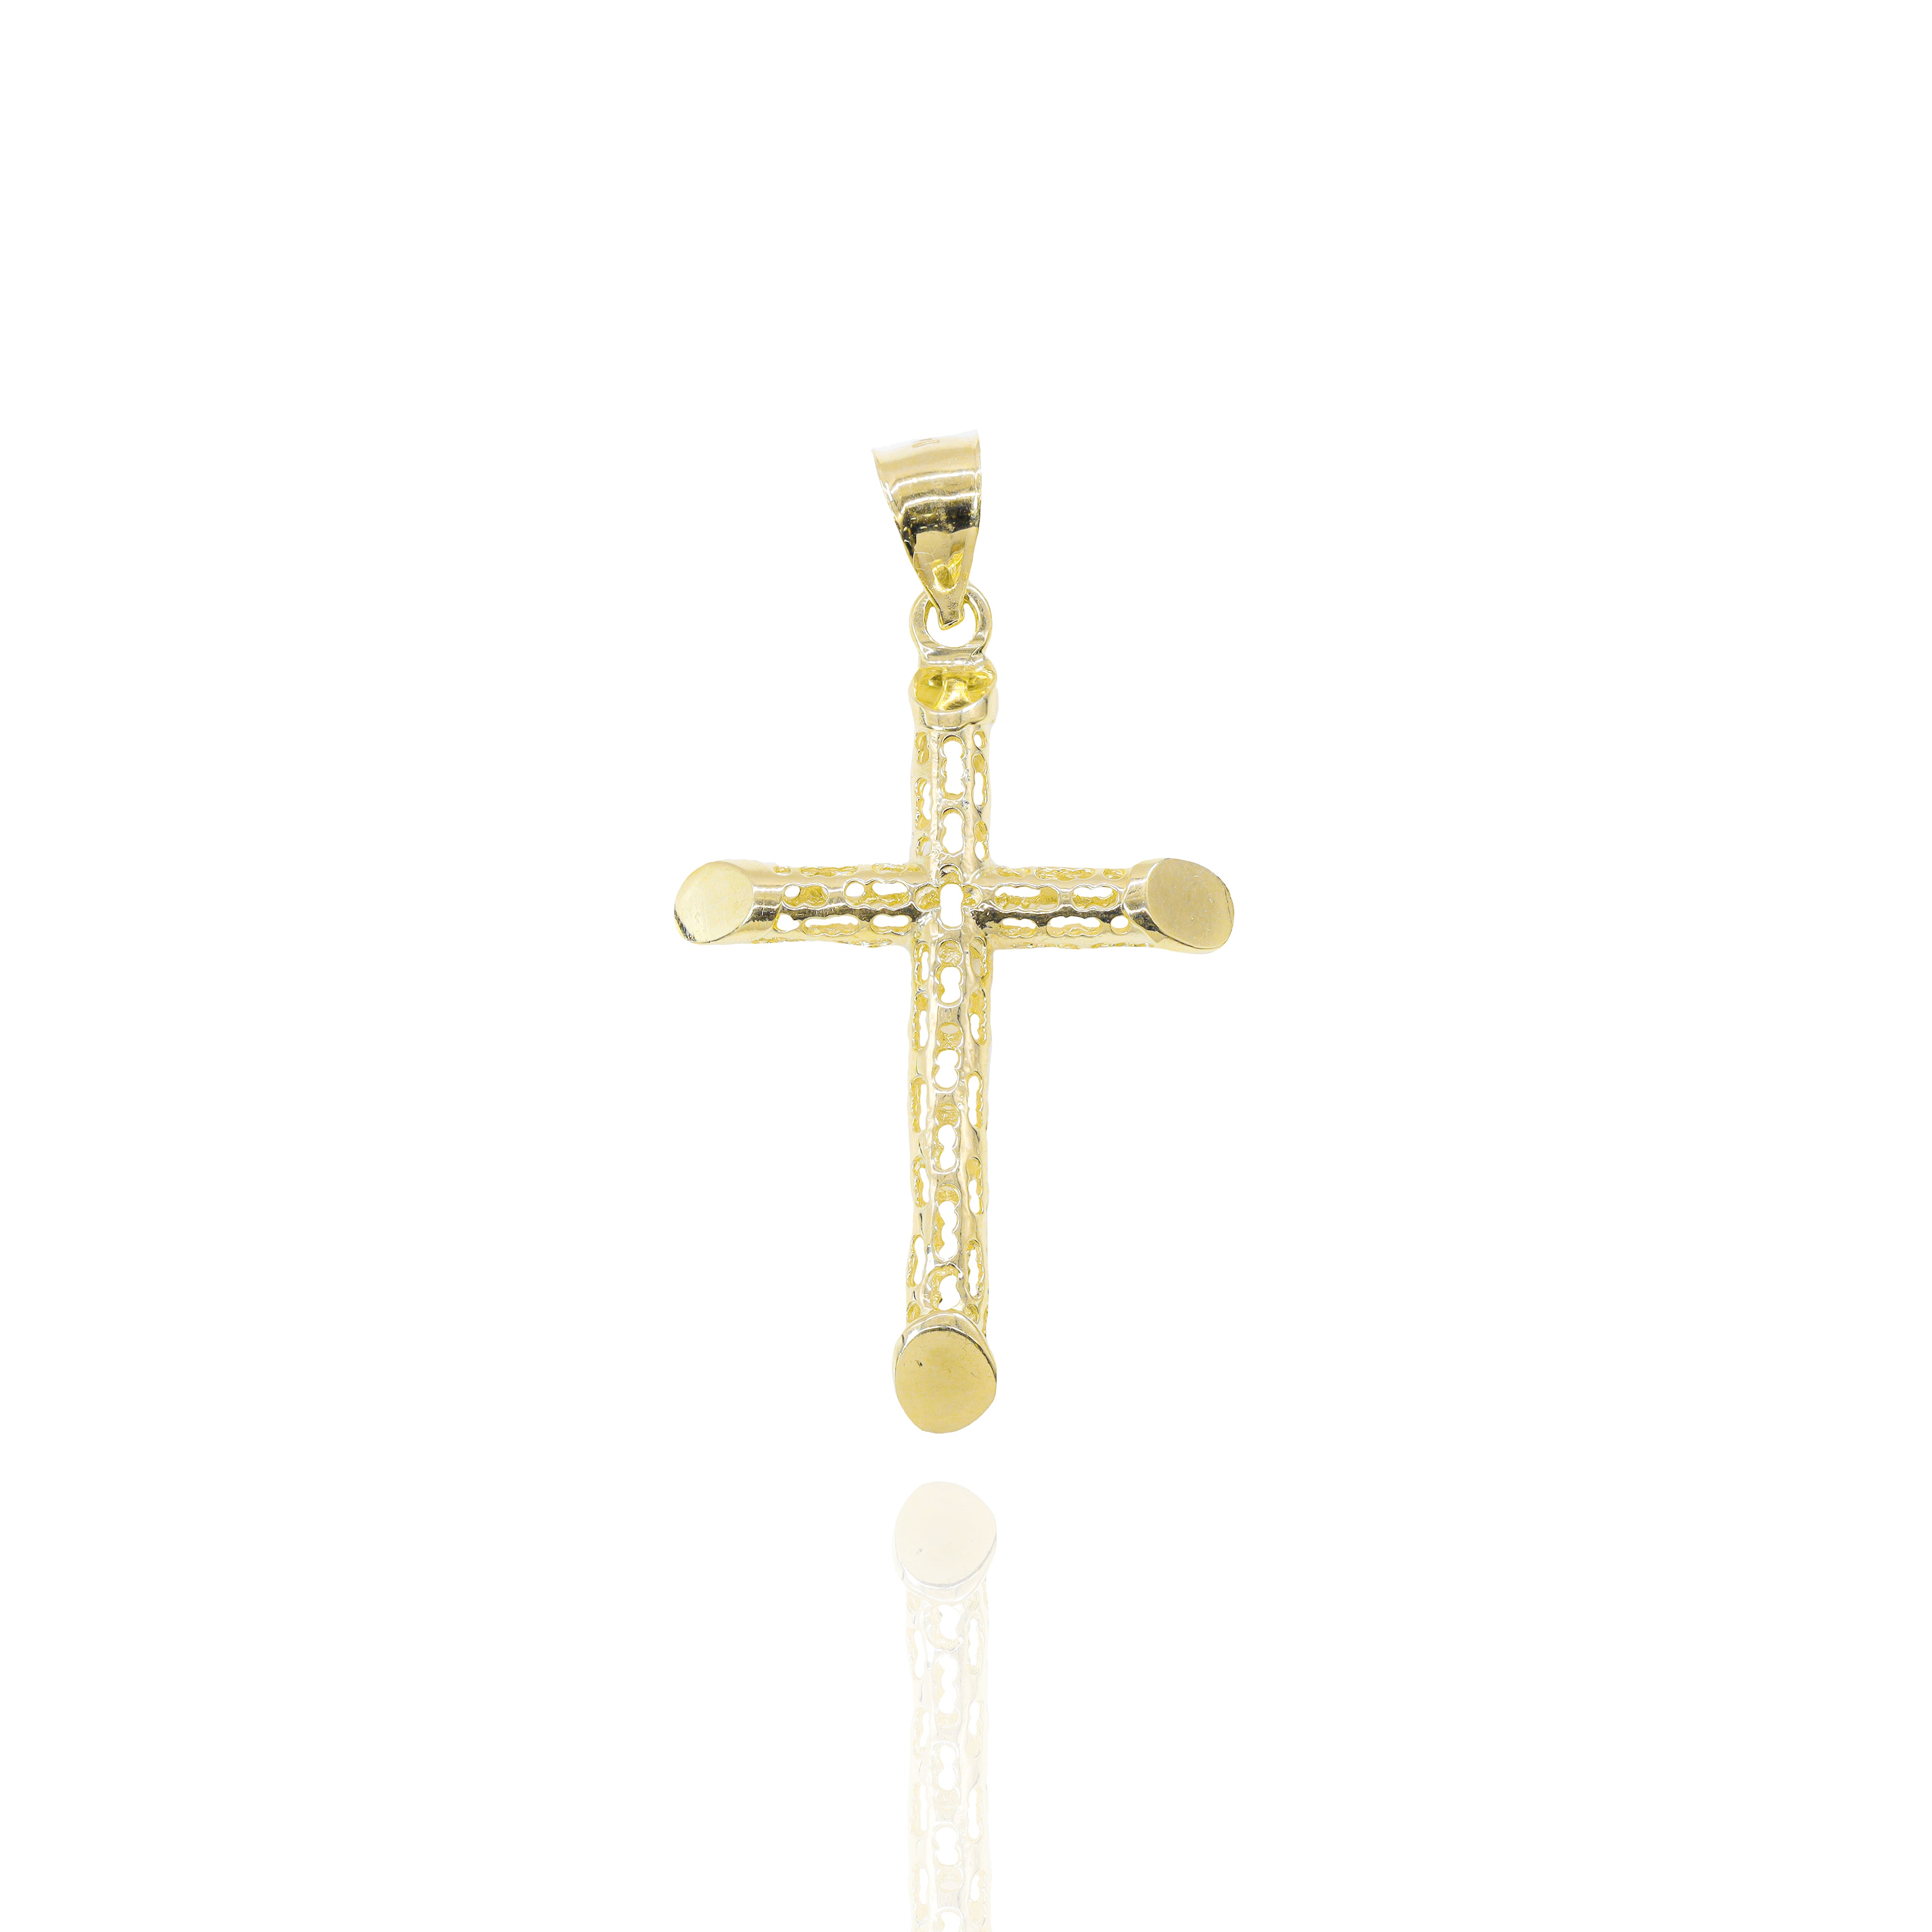 Italian Gold Cross Pendant with Opening (Small)